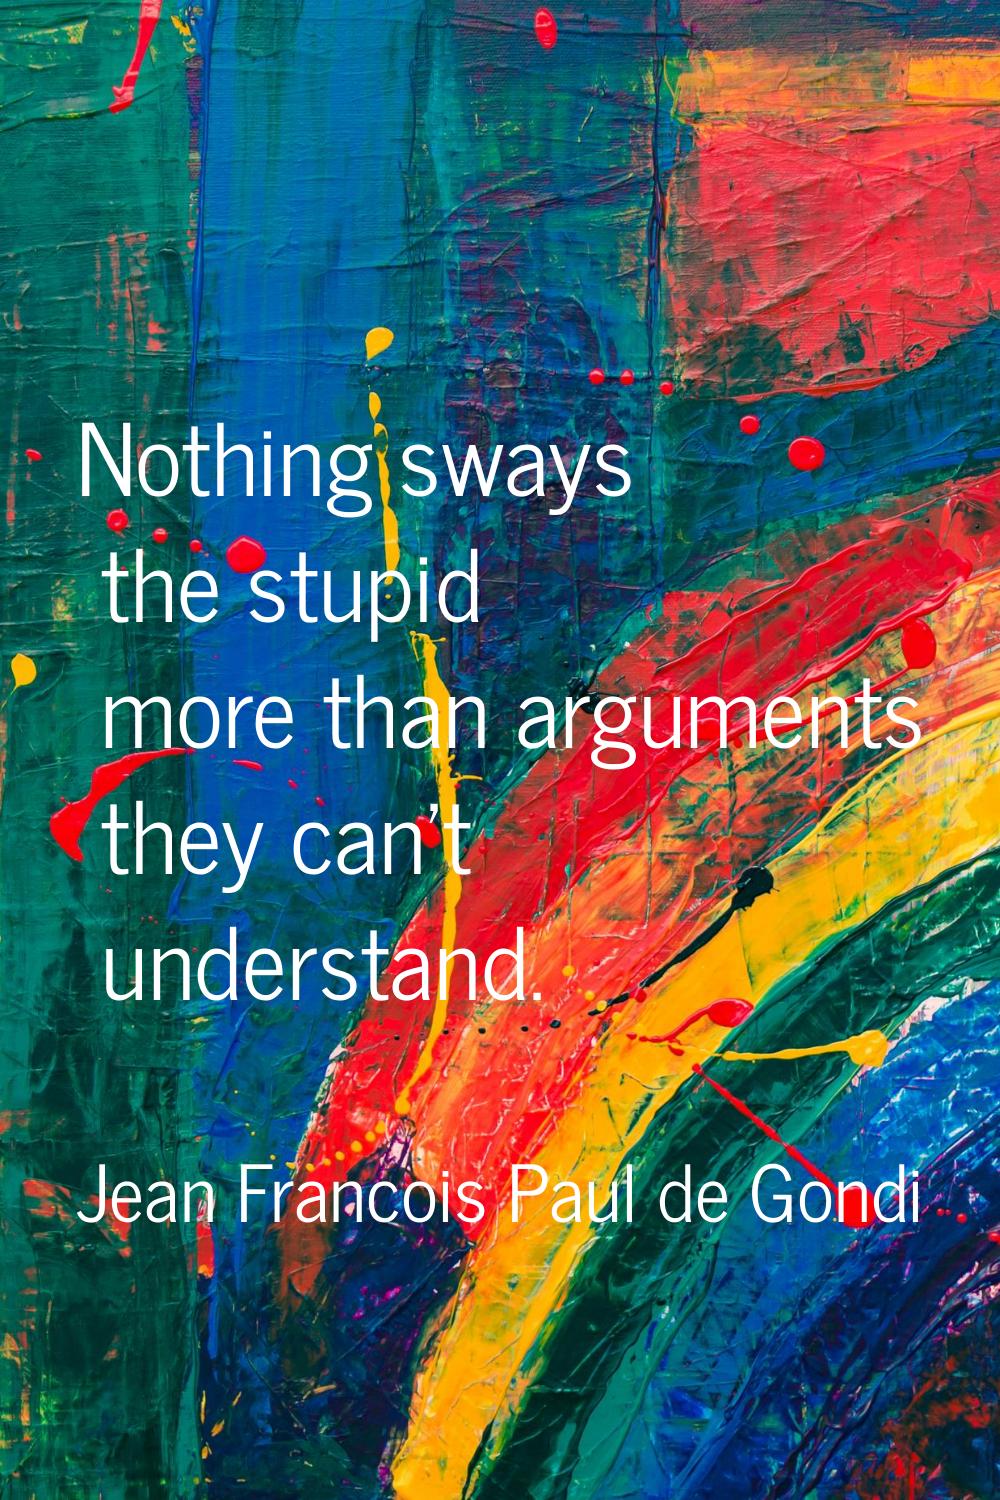 Nothing sways the stupid more than arguments they can't understand.